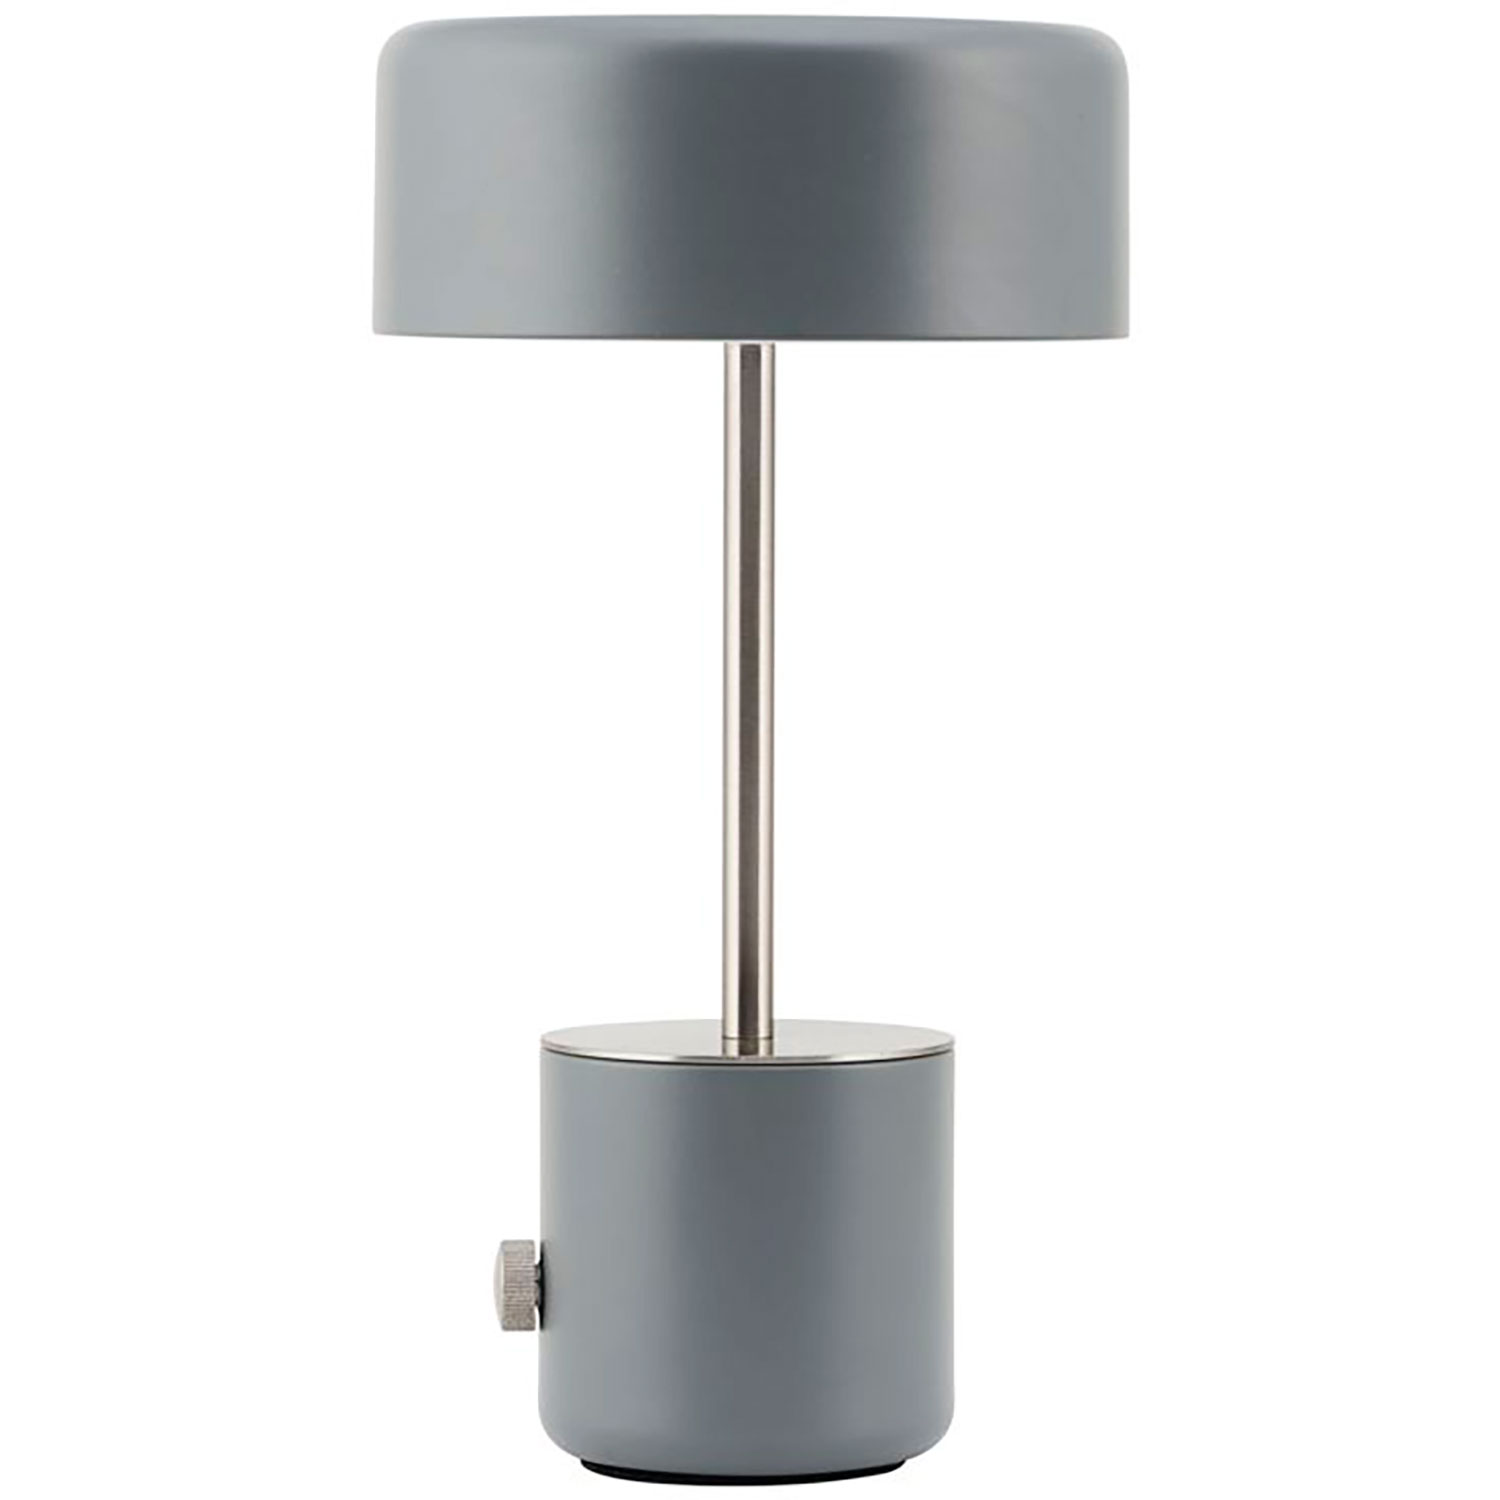 Contour dictator dress up Bring Table Lamp, Gray - House Doctor @ Rum21.fi